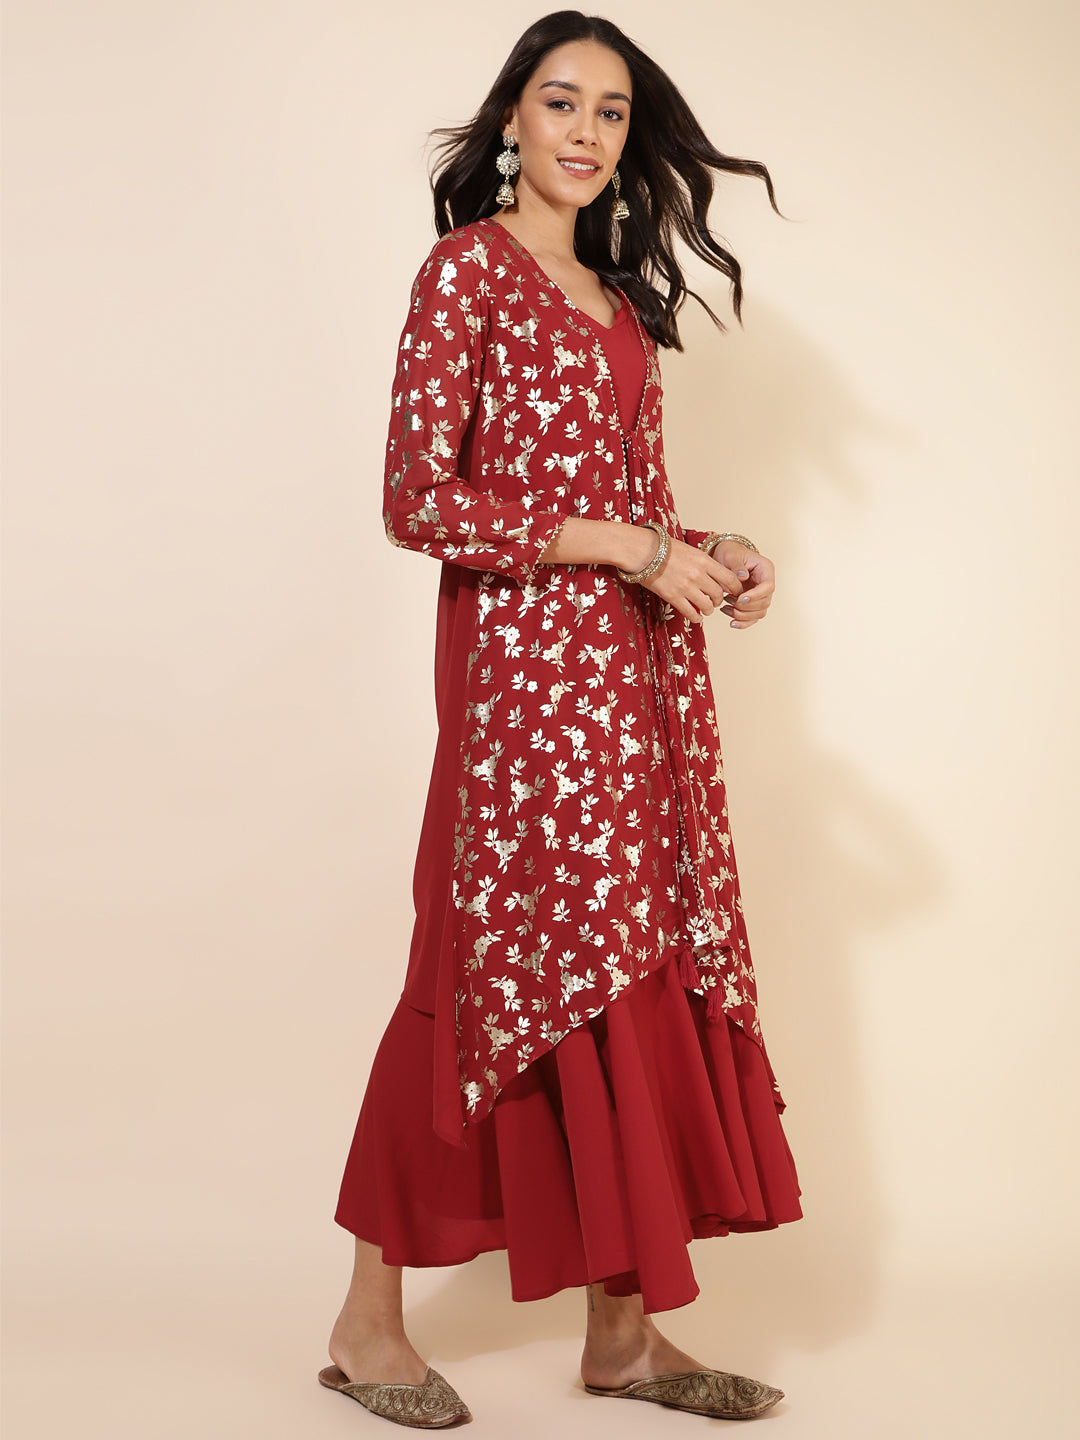 Red Georgette Foil Printed Dress with Jacket